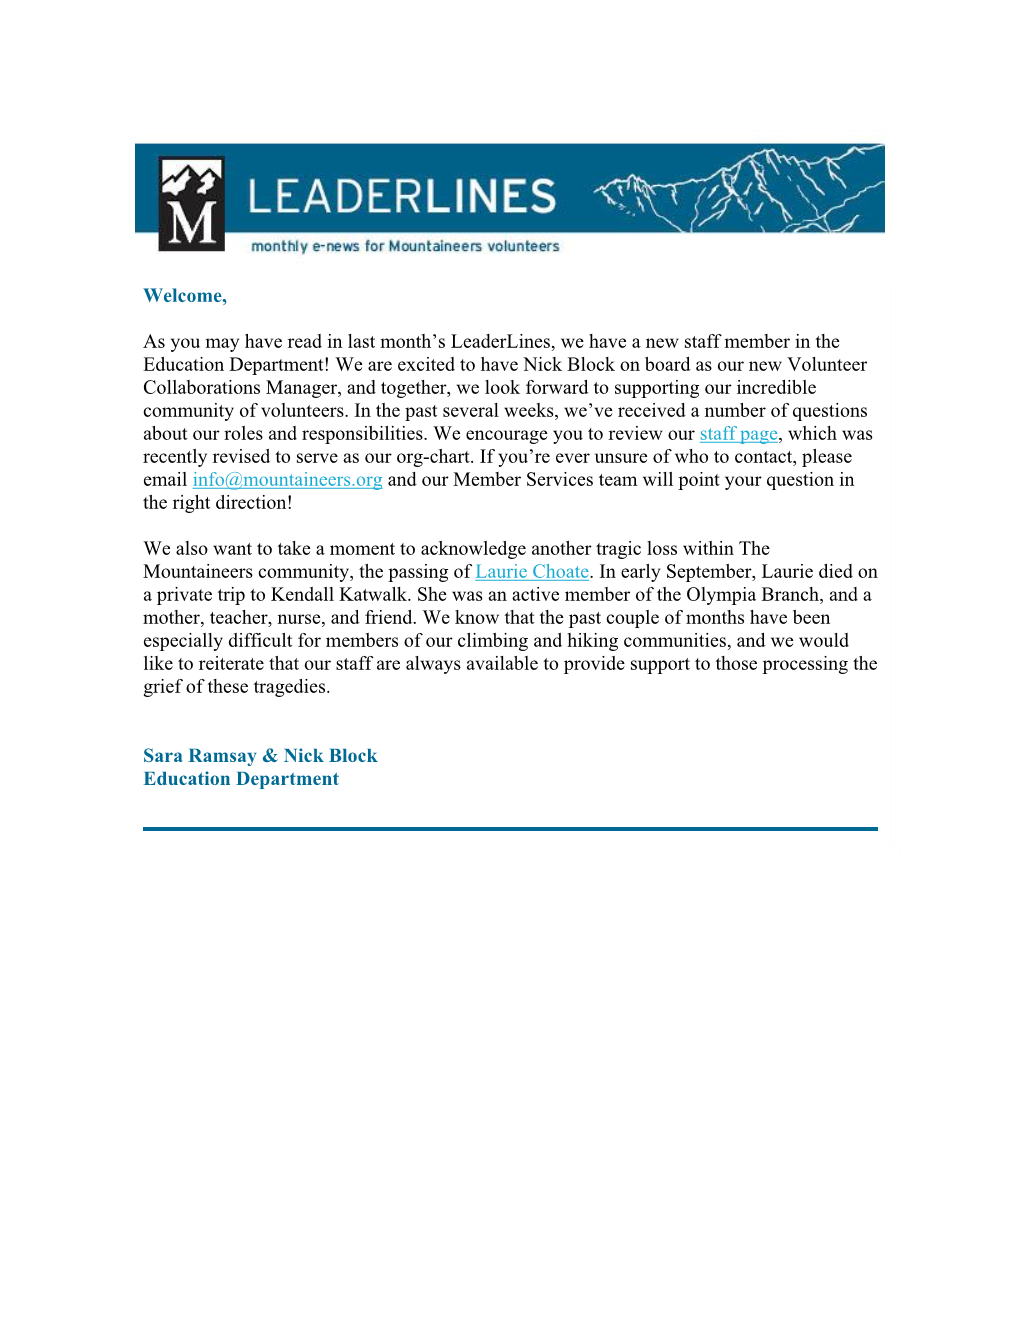 As You May Have Read in Last Month's Leaderlines, We Have a New Staff